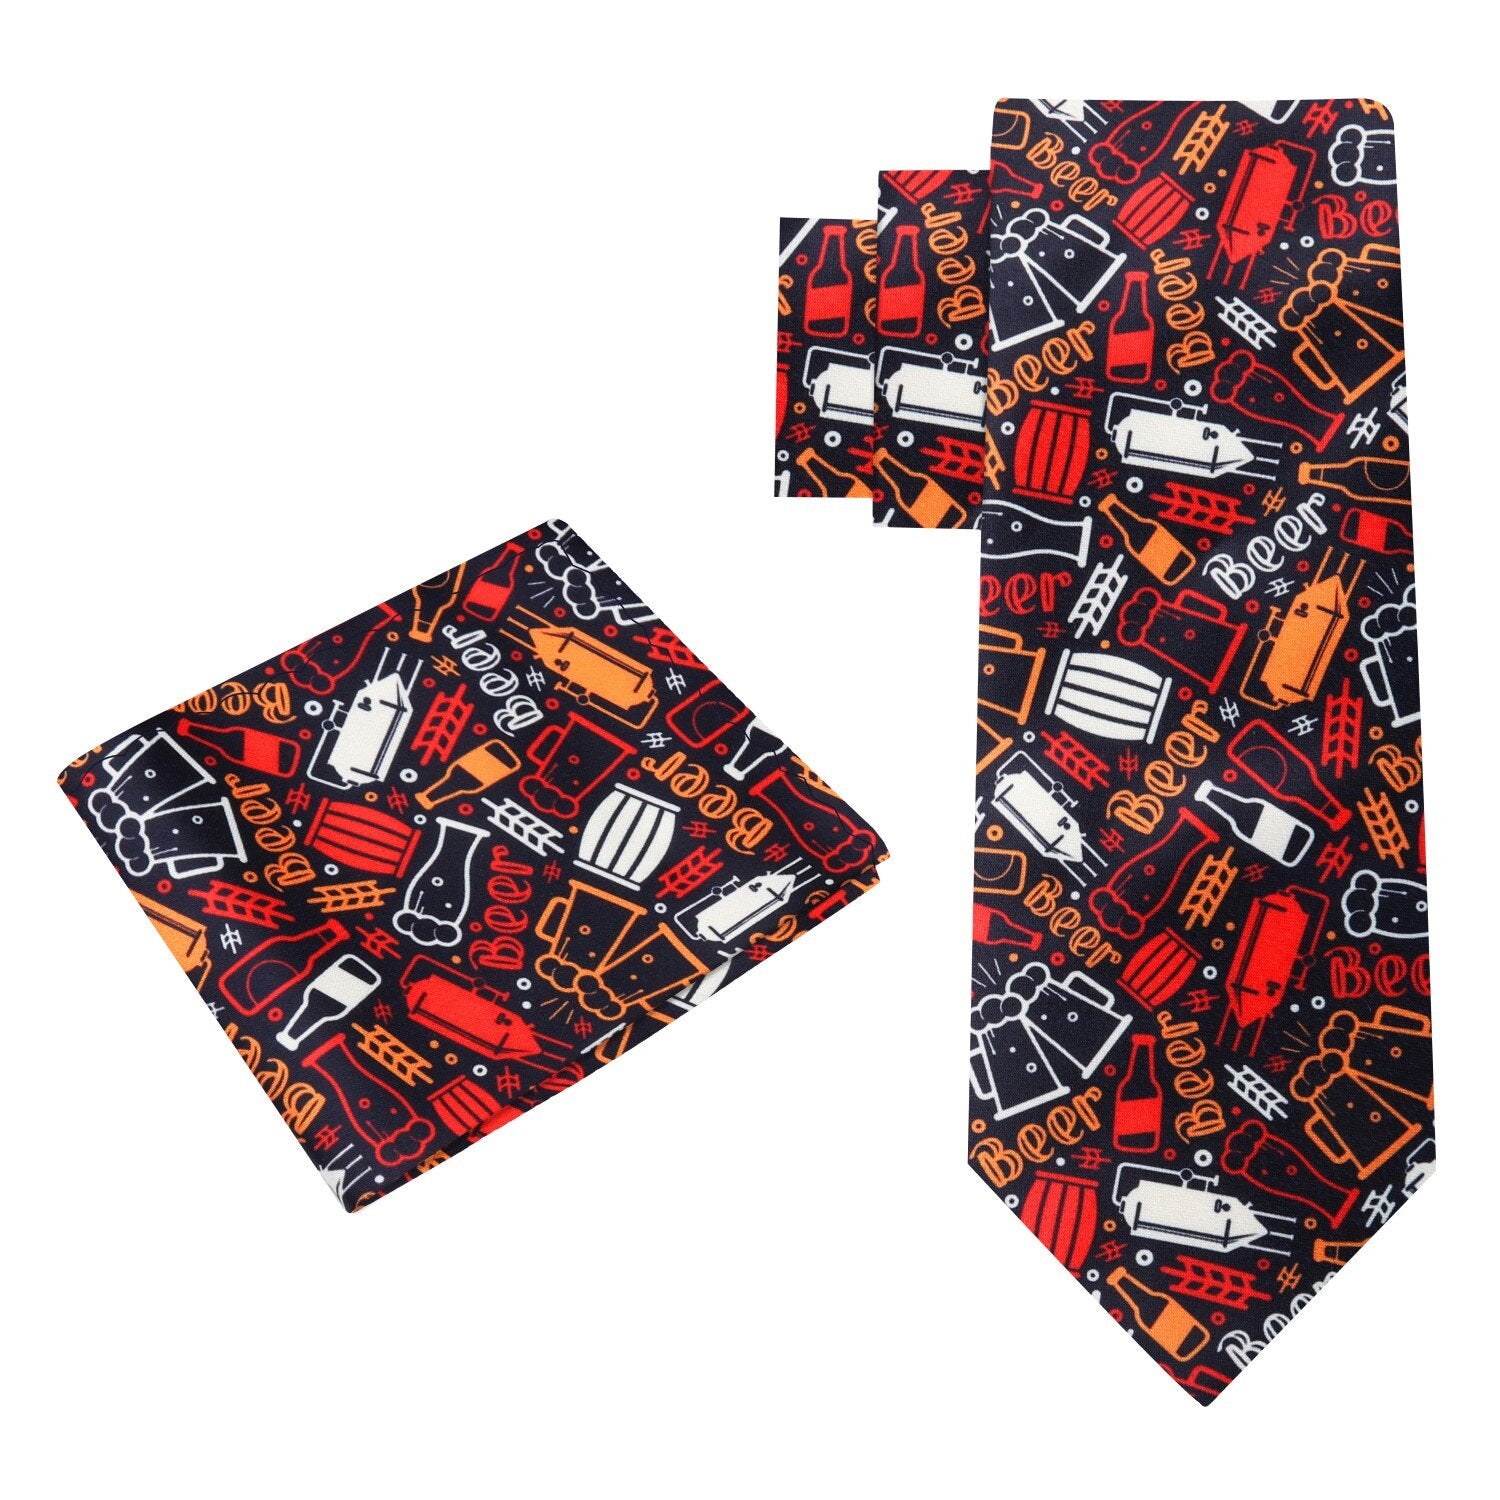 Alt View: Black, Red, Orange, White Beer Themed Tie and Pocket Square